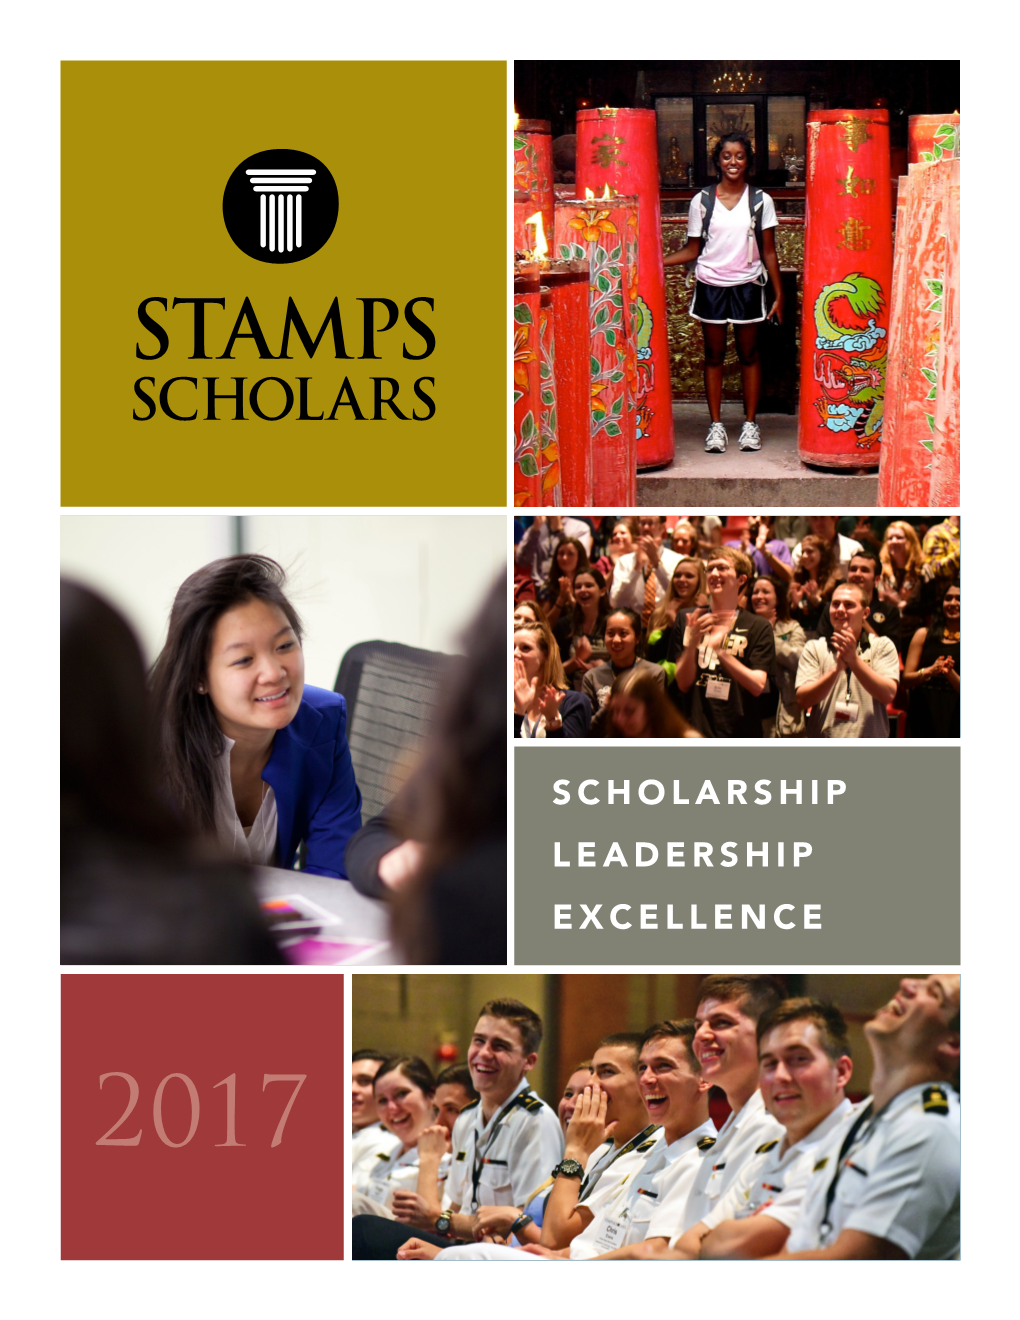 Scholarship Leadership Excellence